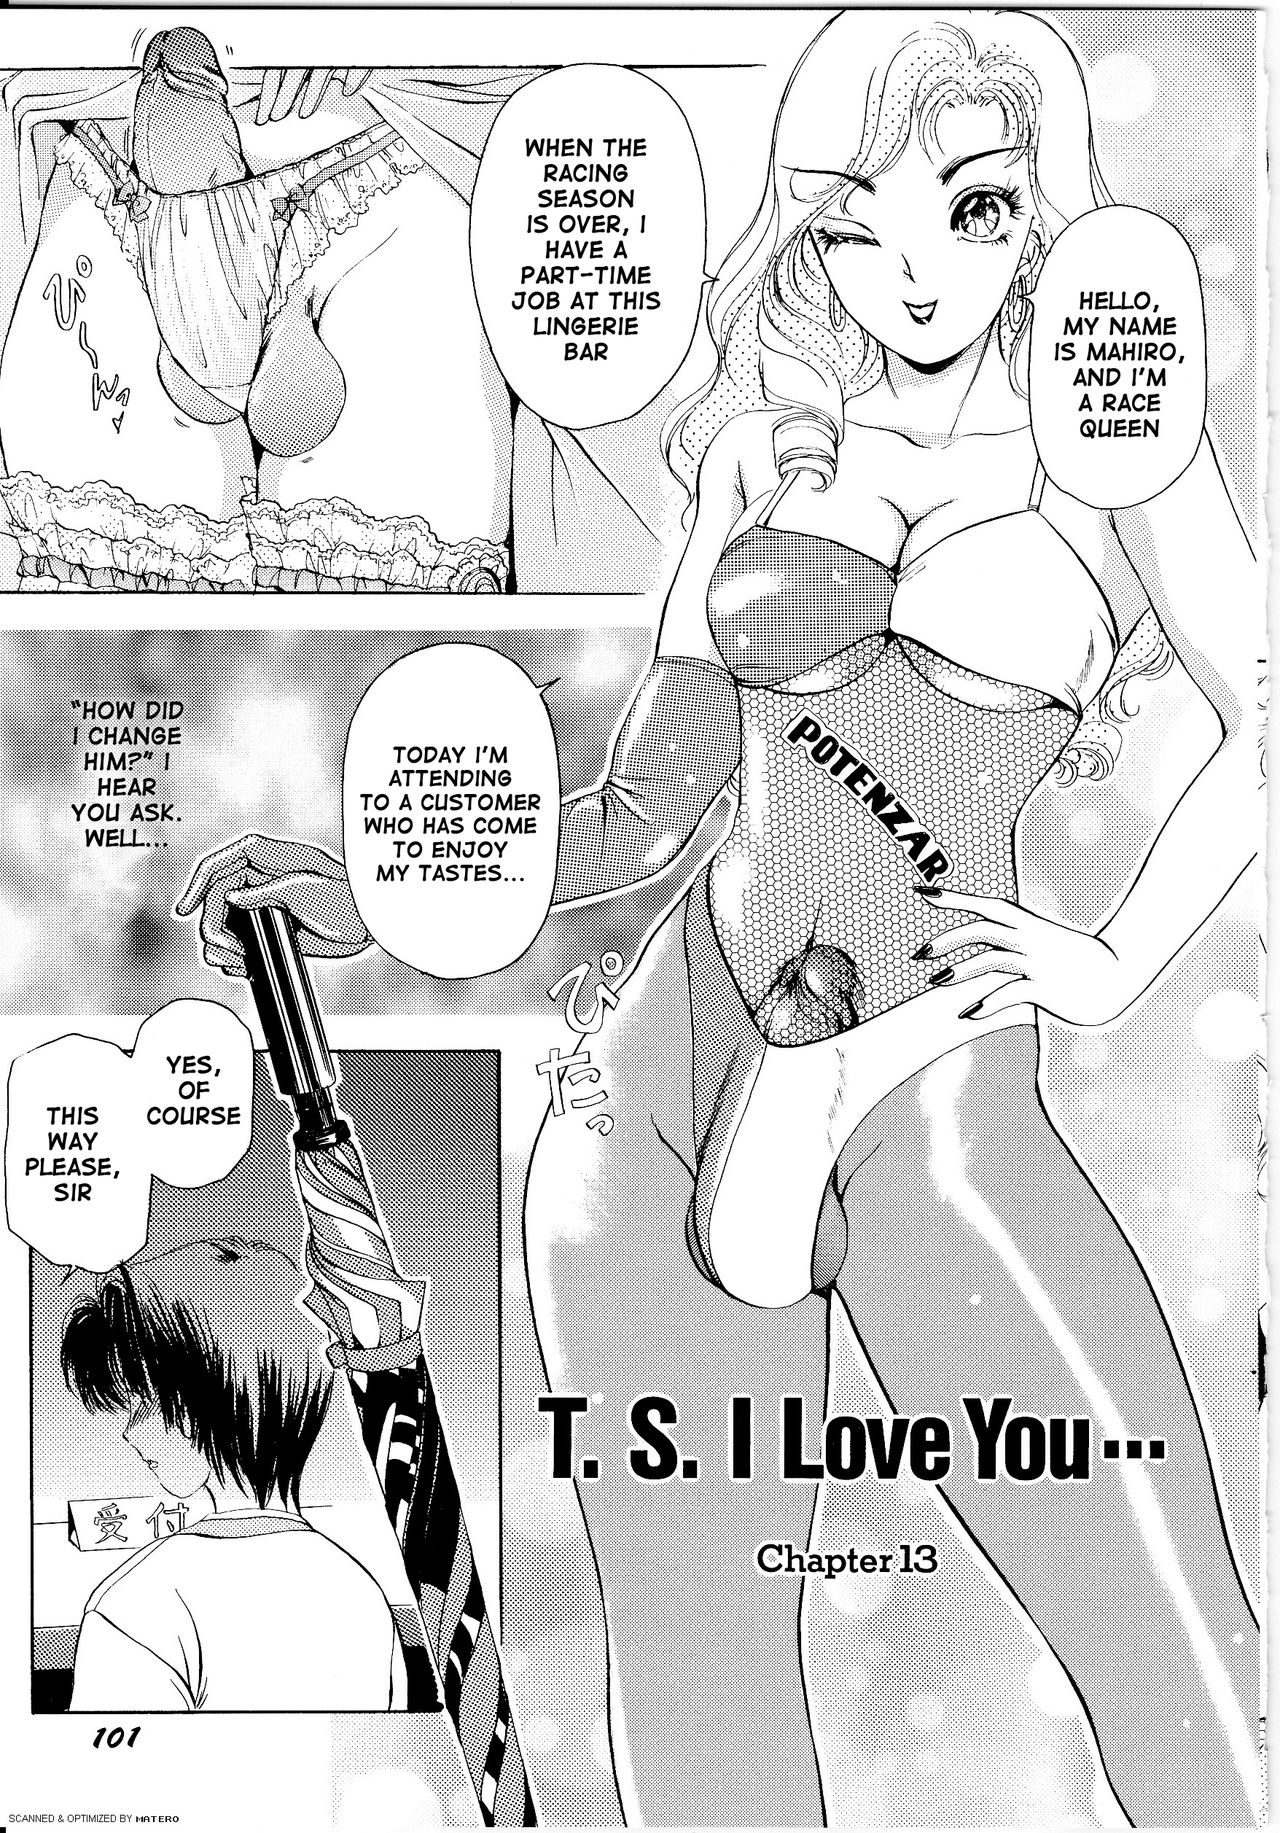 [The Amanoja9] T.S. I LOVE YOU... 1 Chapter 13 [English] page 1 full